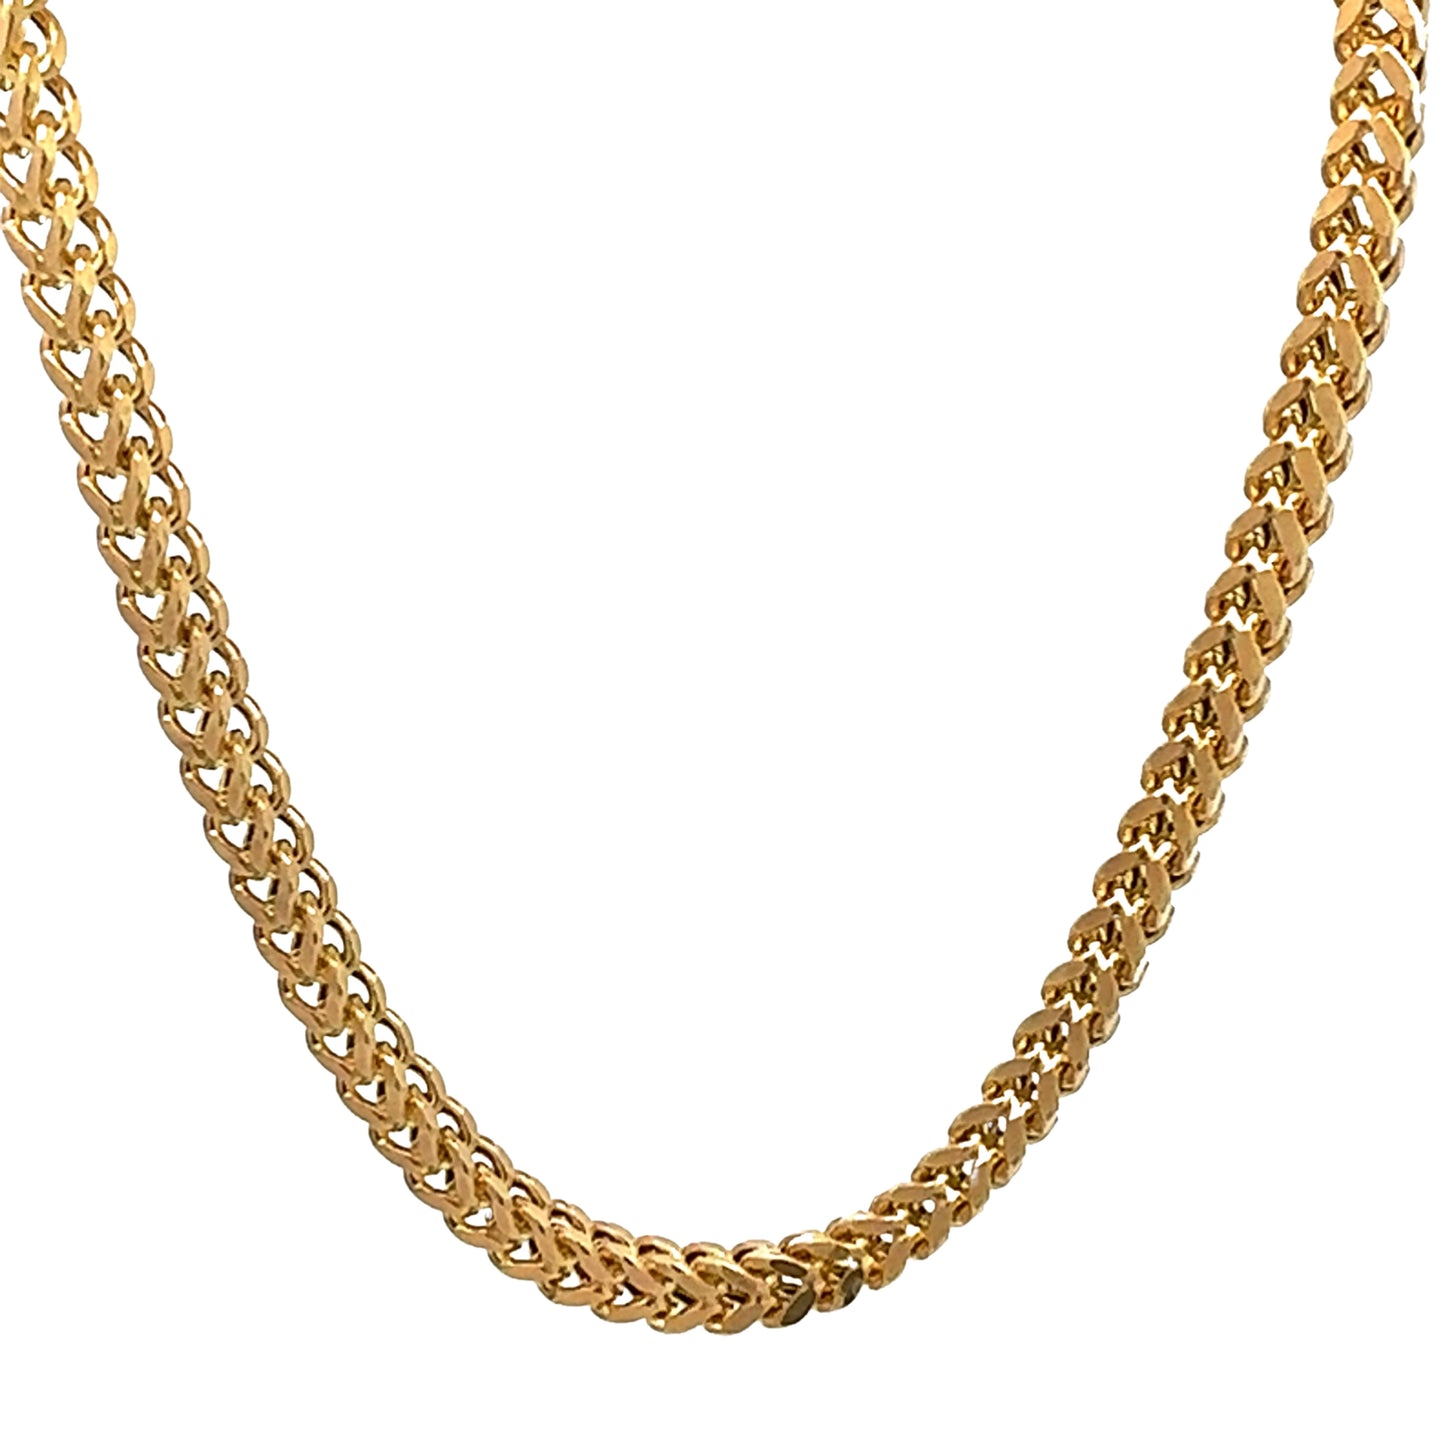 Hanging yellow gold thick square franco chain